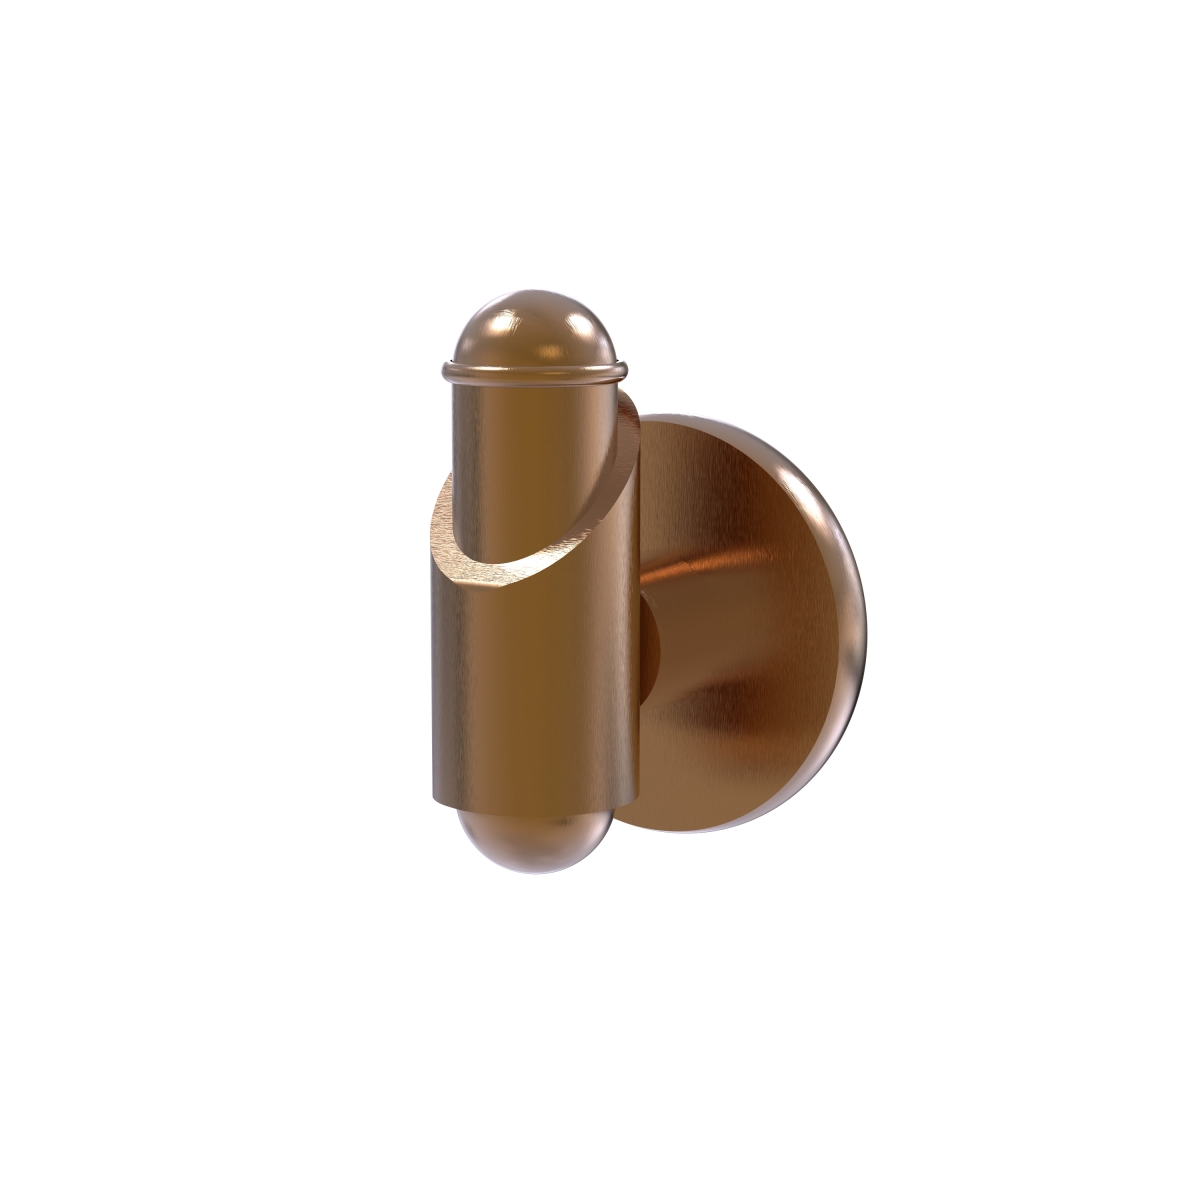 SH-20A-BBR Soho Collection Robe Hook, Brushed Bronze